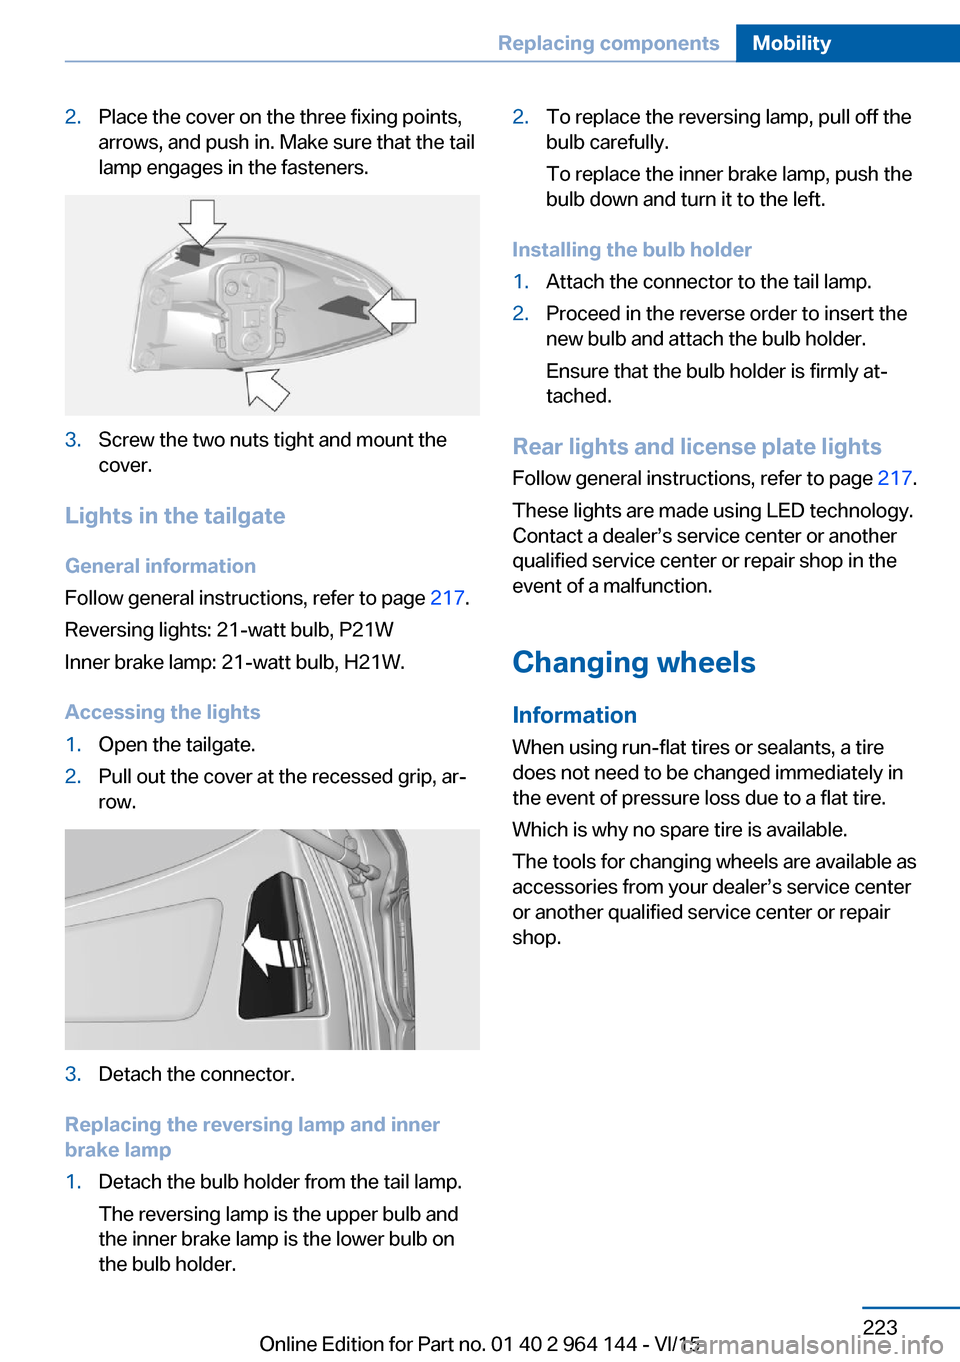 BMW X4 2015 F26 Owners Guide 2.Place the cover on the three fixing points,
arrows, and push in. Make sure that the tail
lamp engages in the fasteners.3.Screw the two nuts tight and mount the
cover.
Lights in the tailgate
General 